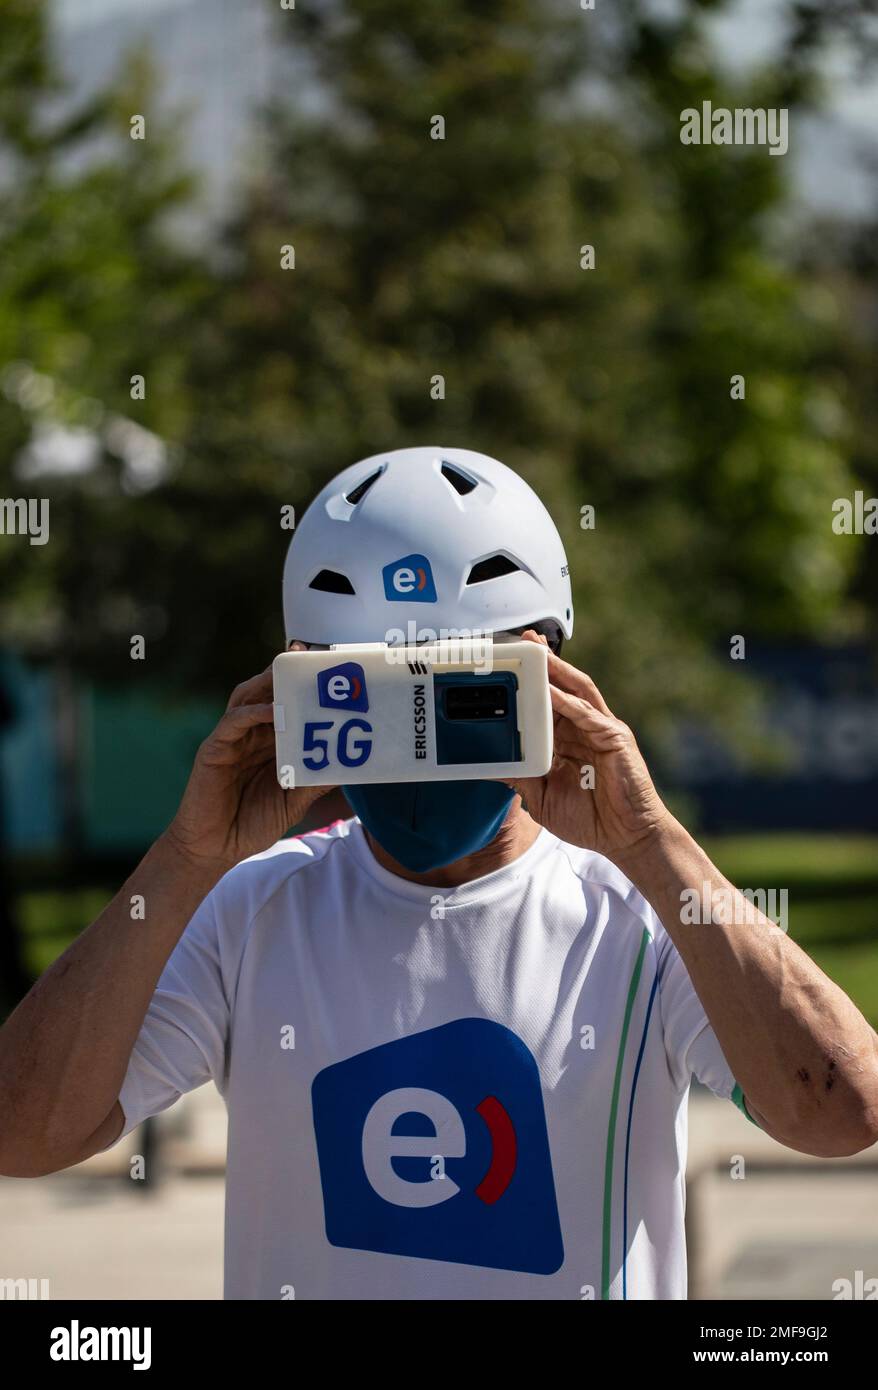 Sebastian Vasquez, a MTB downhill world tri-champion, demonstrates how he looks through goggles connected to a 5G network that is live-streaming video to him of what he aims is site at, before